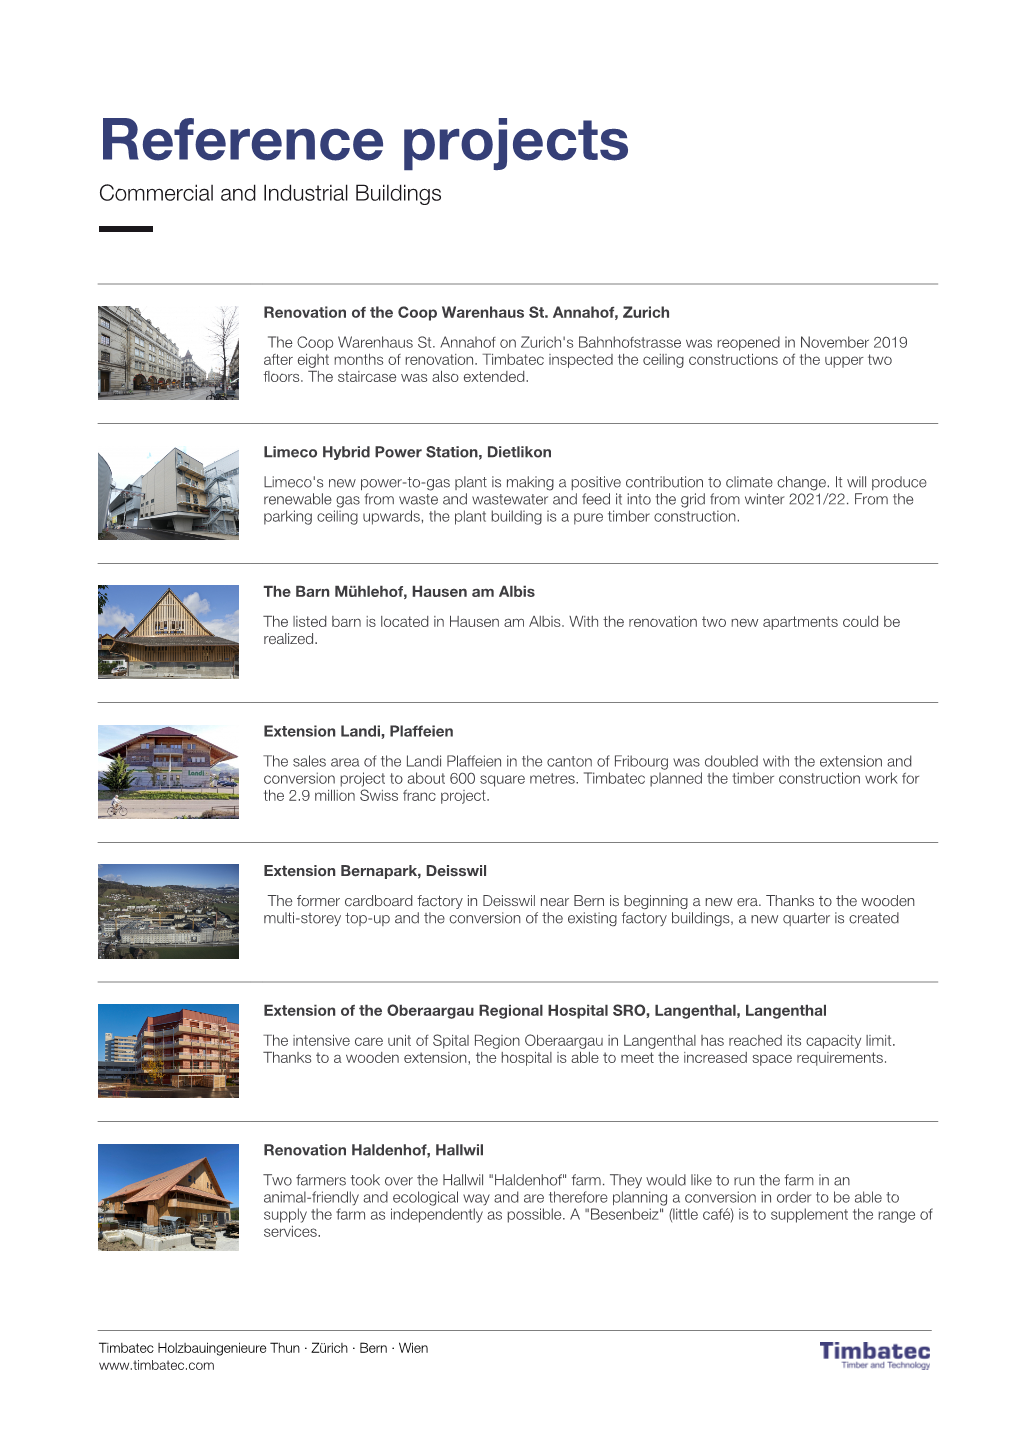 Reference Projects Commercial and Industrial Buildings